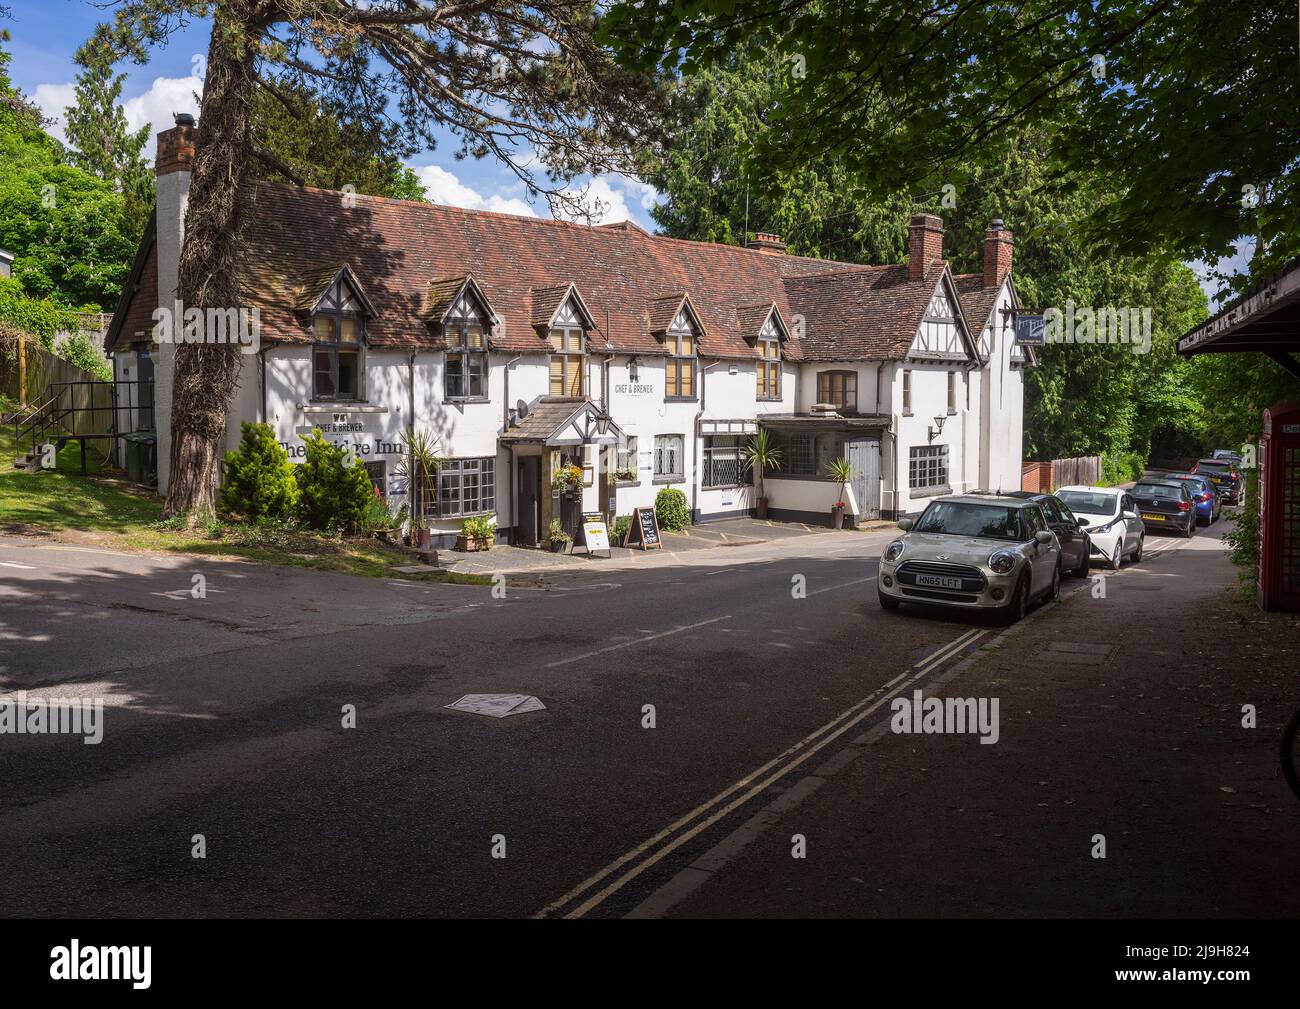 The Bridge Inn public house in the village of Shawford in Hampshire, England Stock Photo